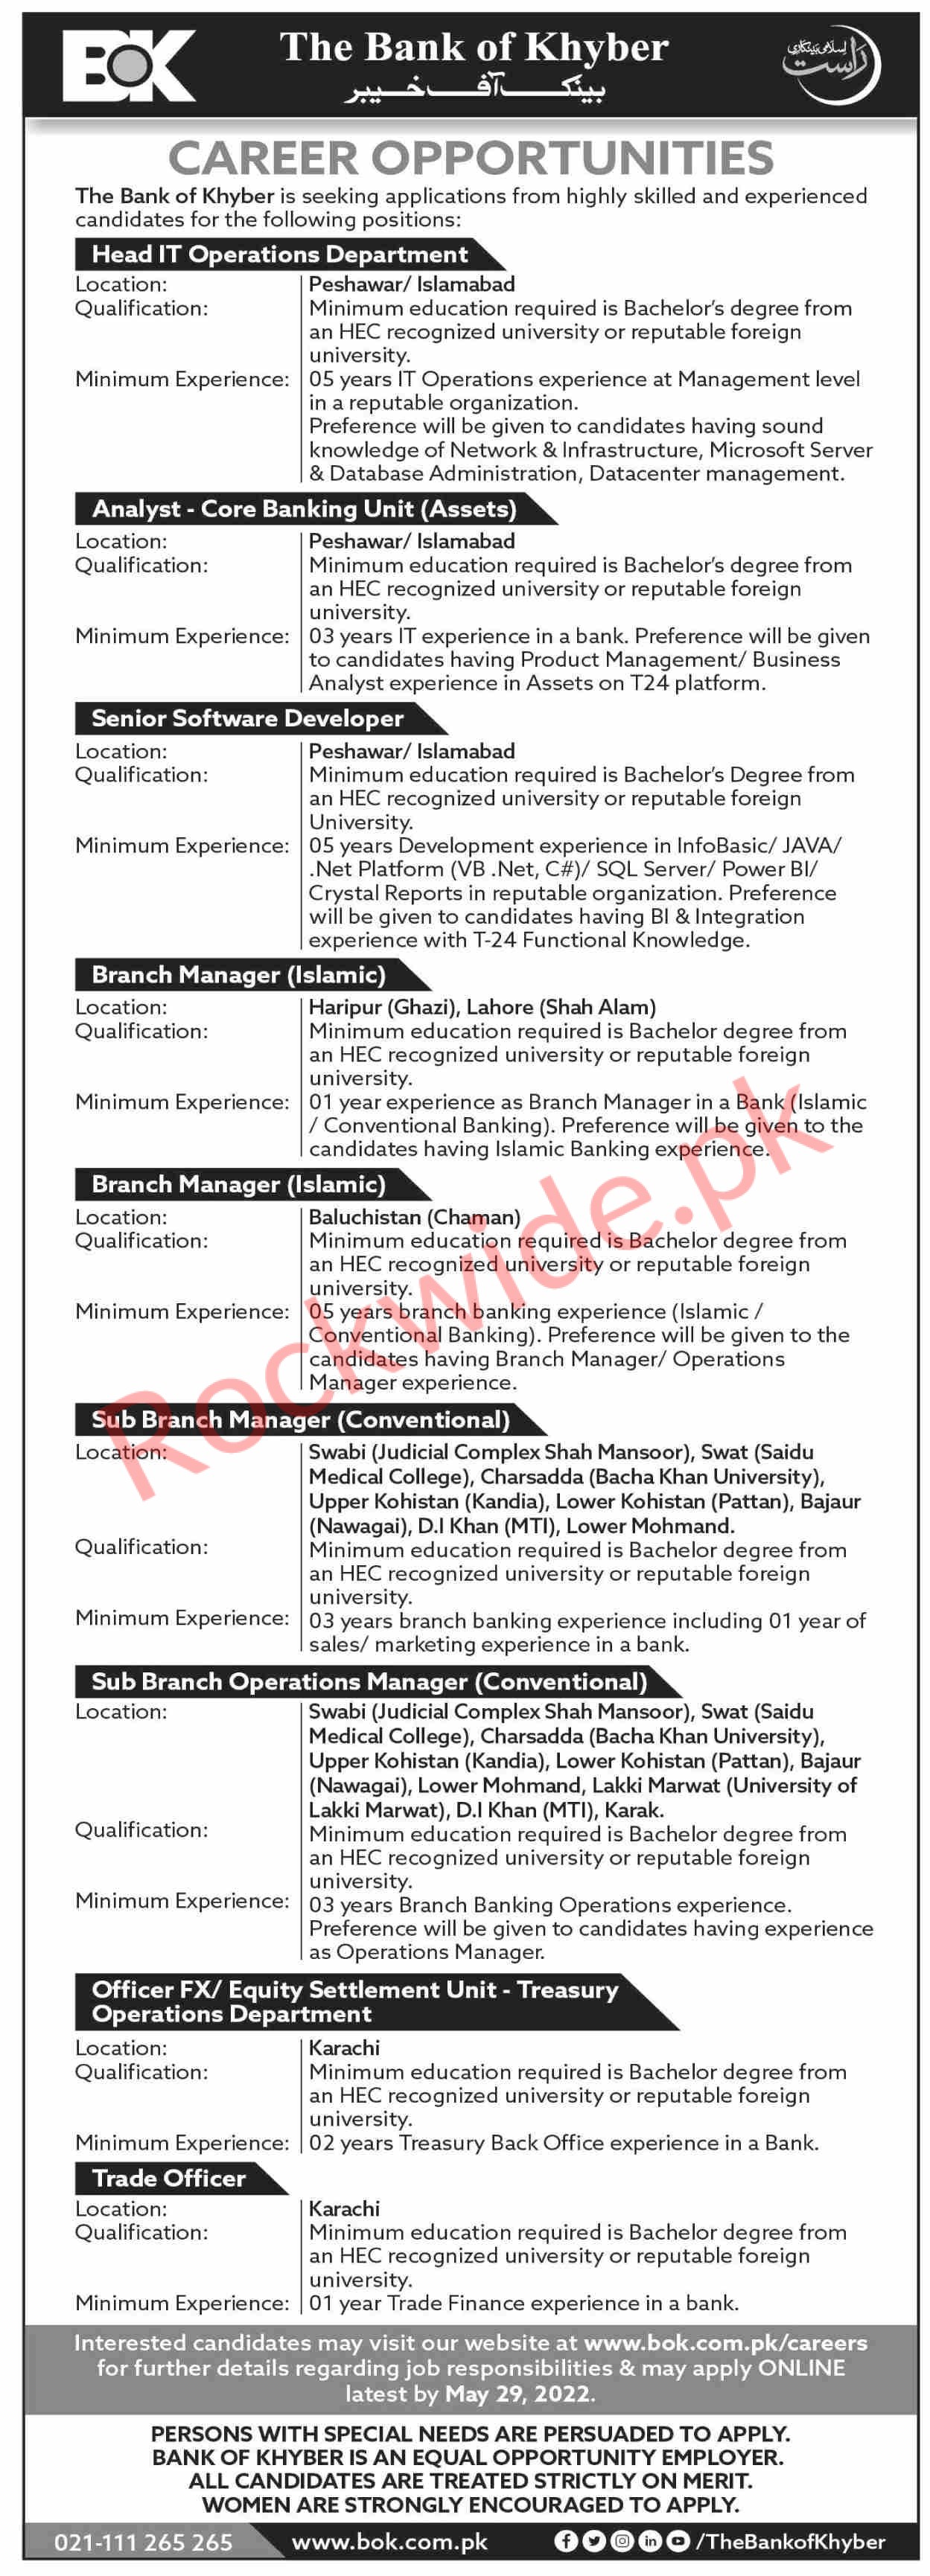 The Bank oF Khyber jobs